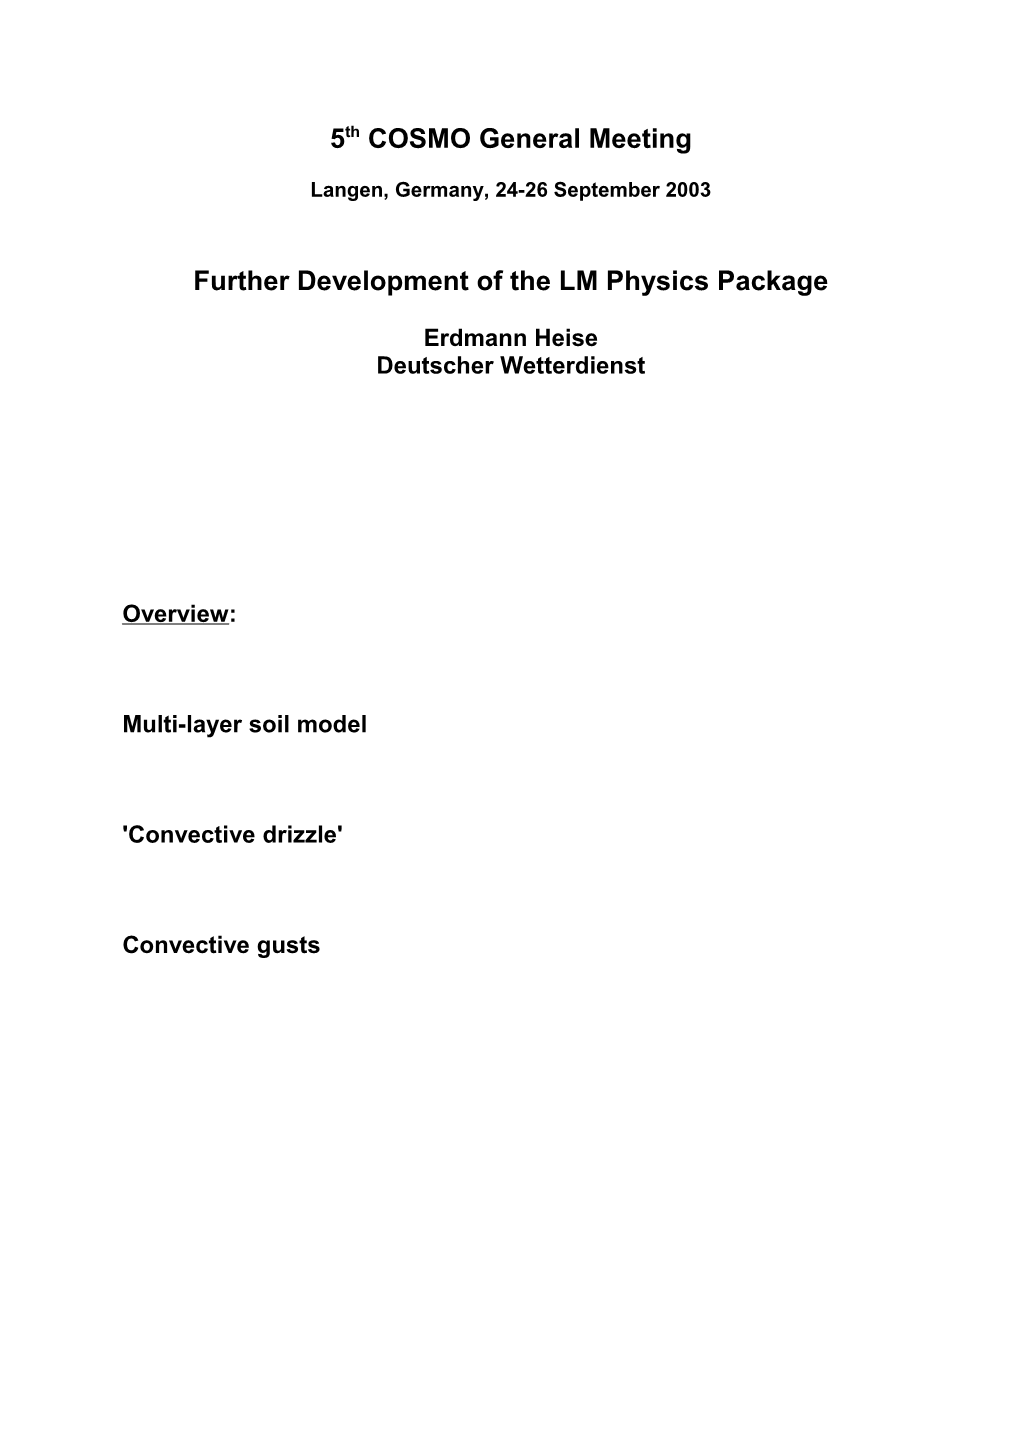 Further Development of the LM Physics Package